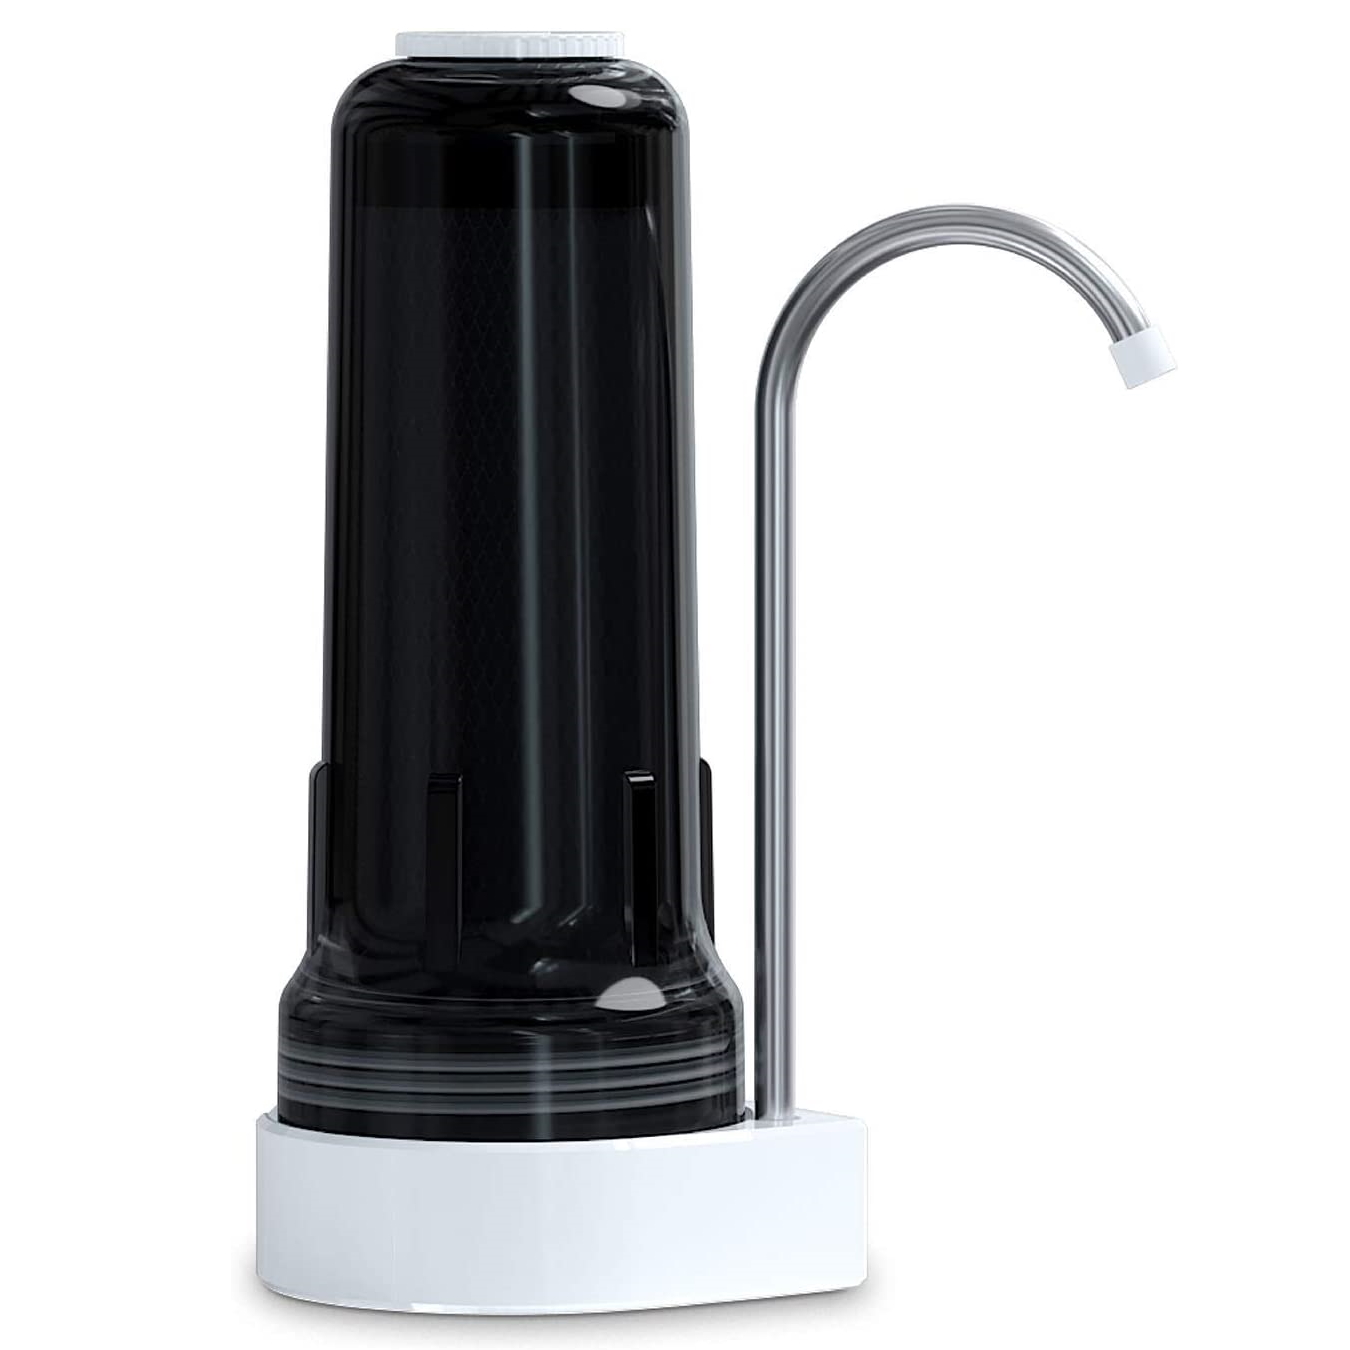 Ecosoft Countertop Drinking Water Filter System